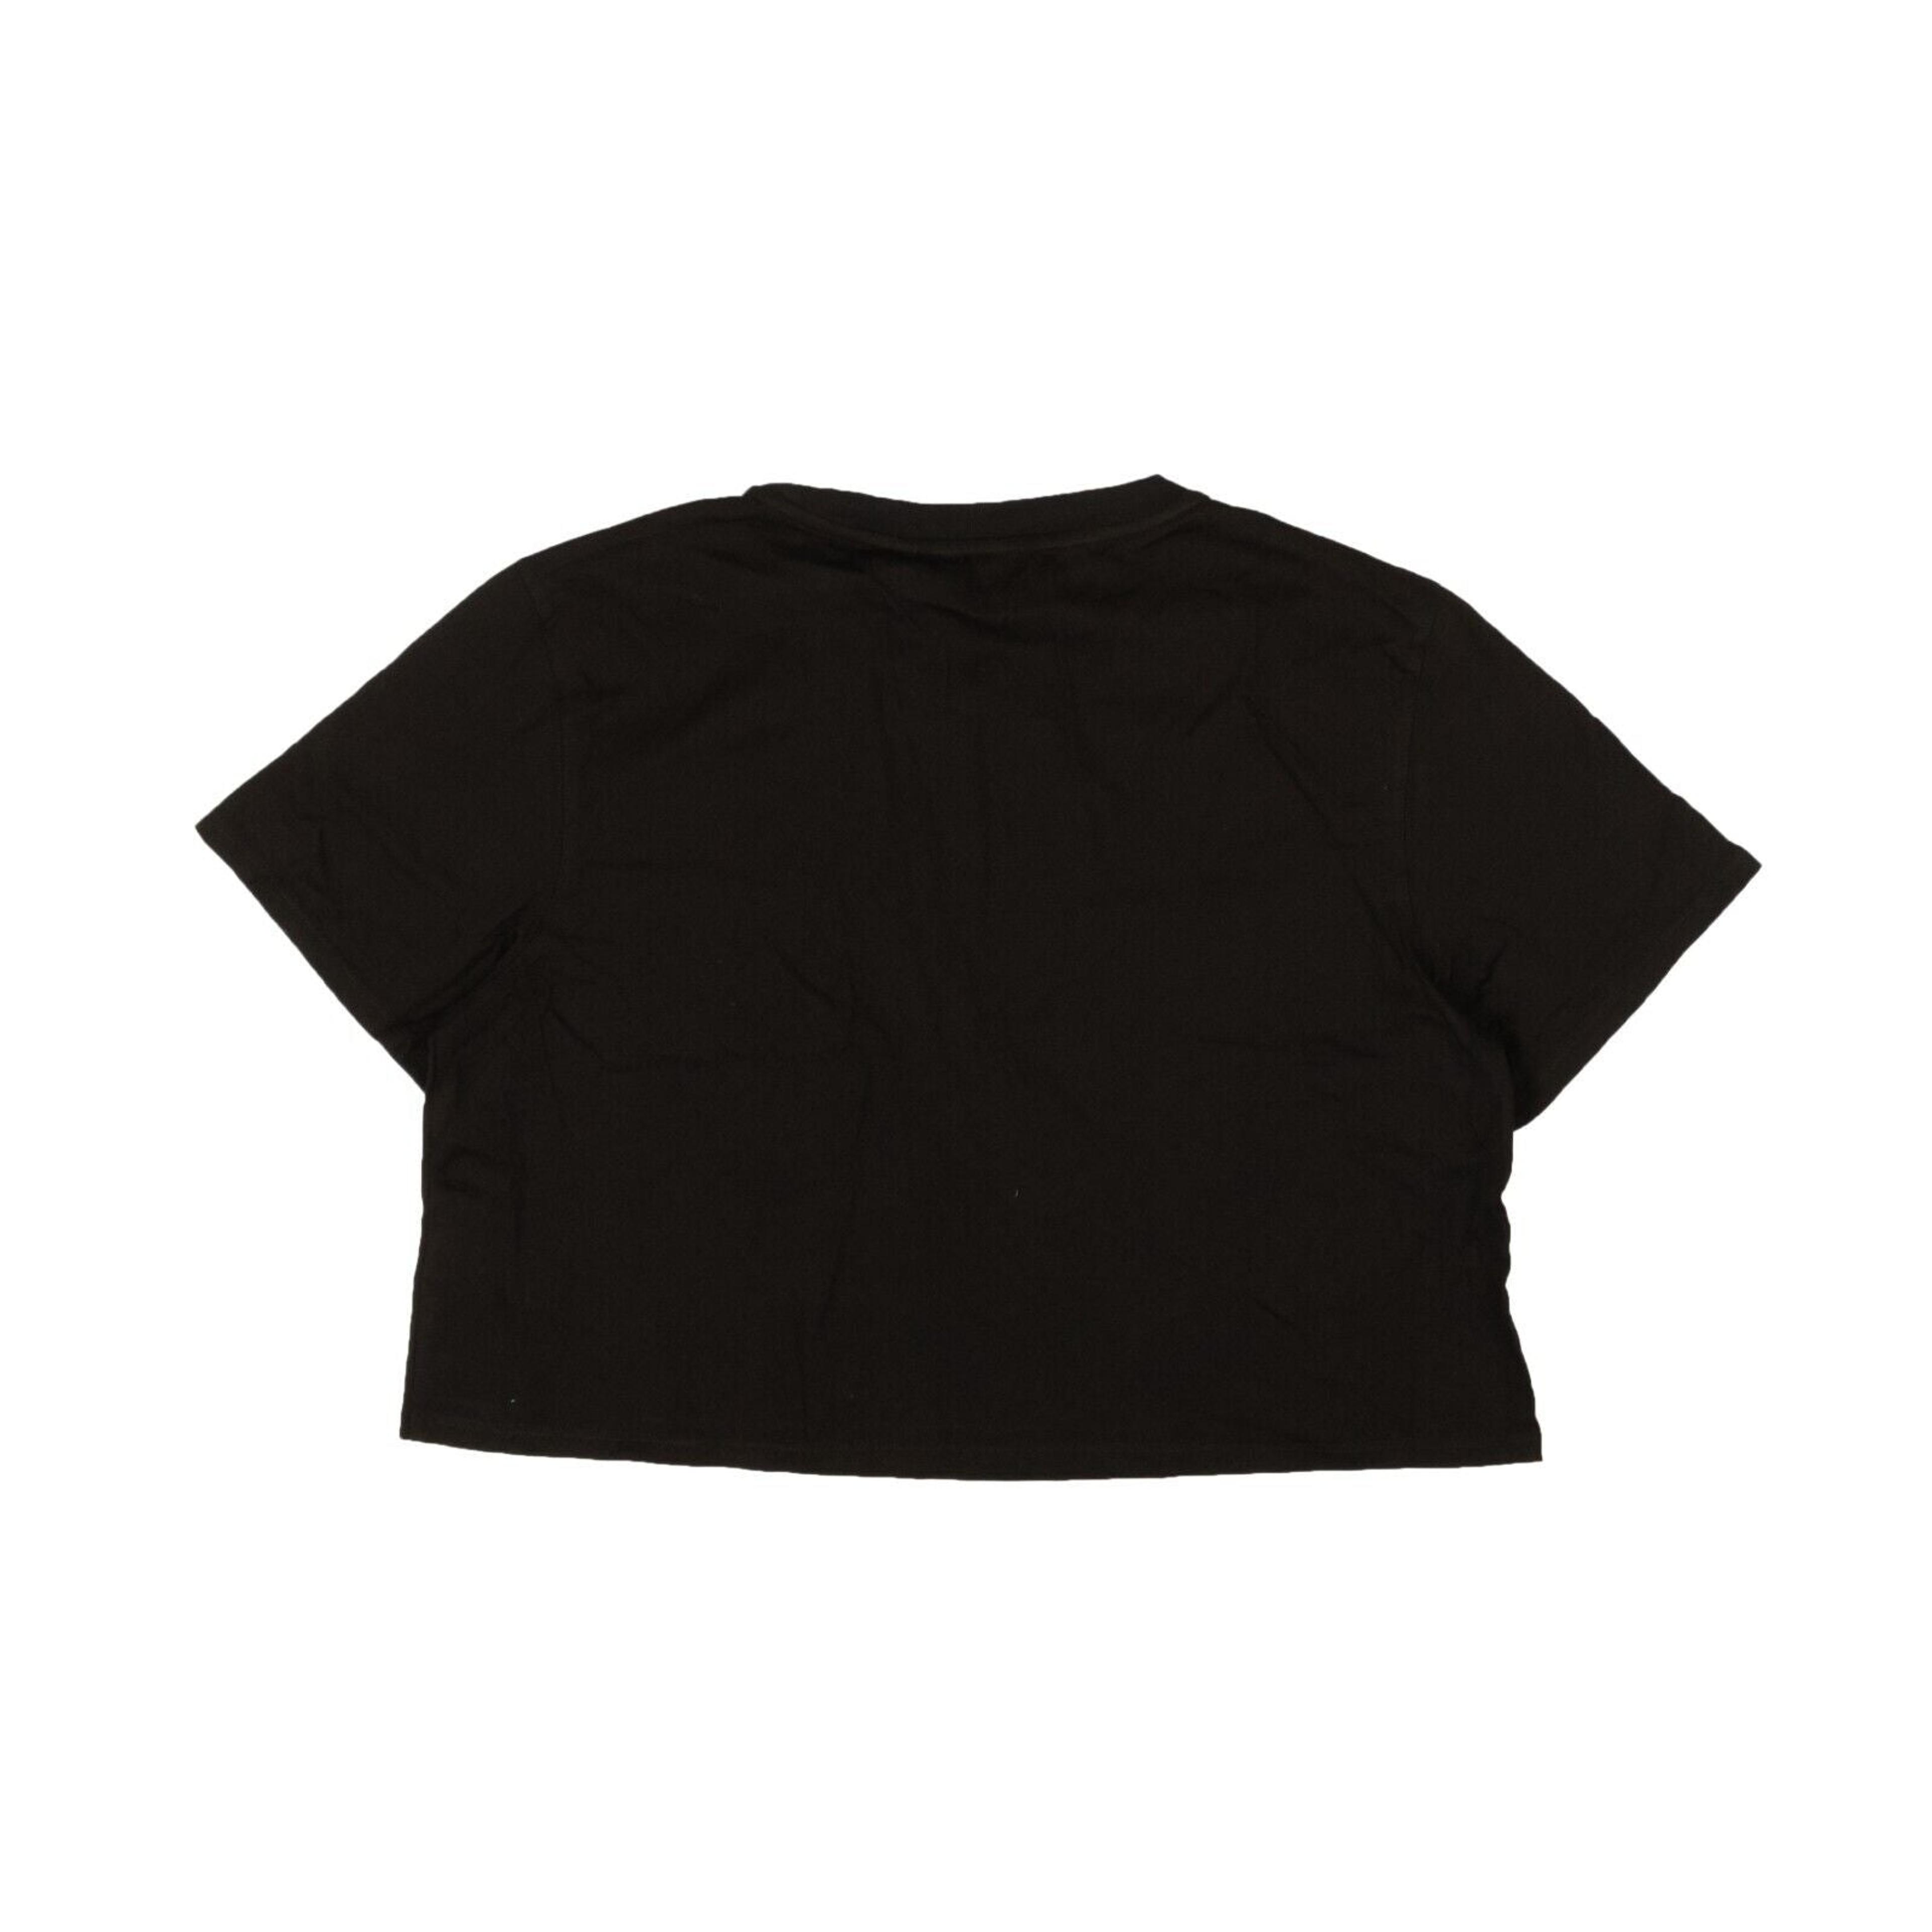 Alternate View 2 of Opening Ceremony Blank Oc Cropped T-Shirt - Black